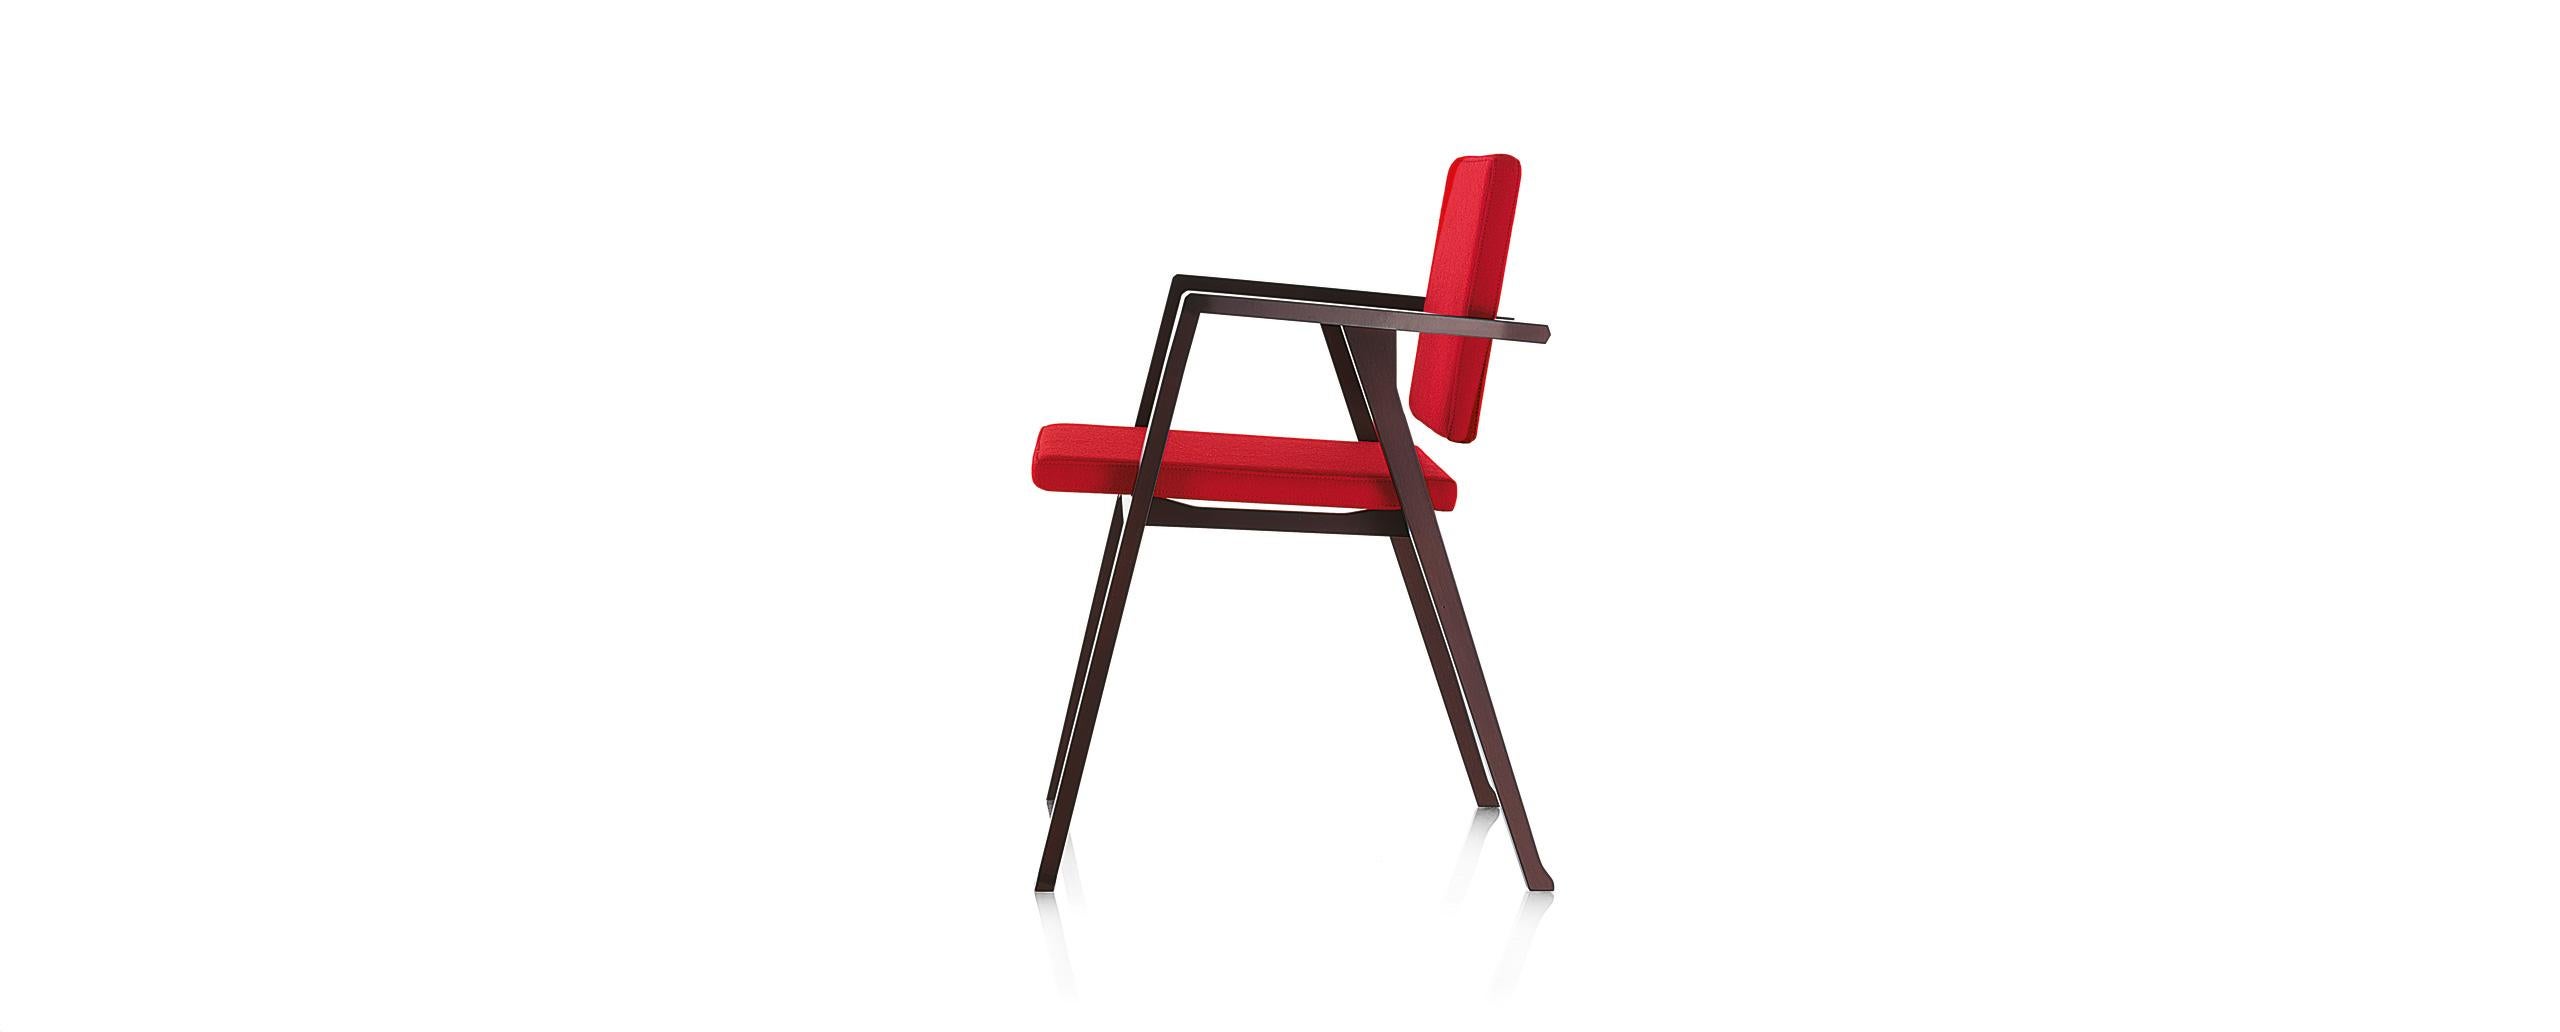 Franco Albini Luisa Chair, American Walnut and Fabric by Cassina 1